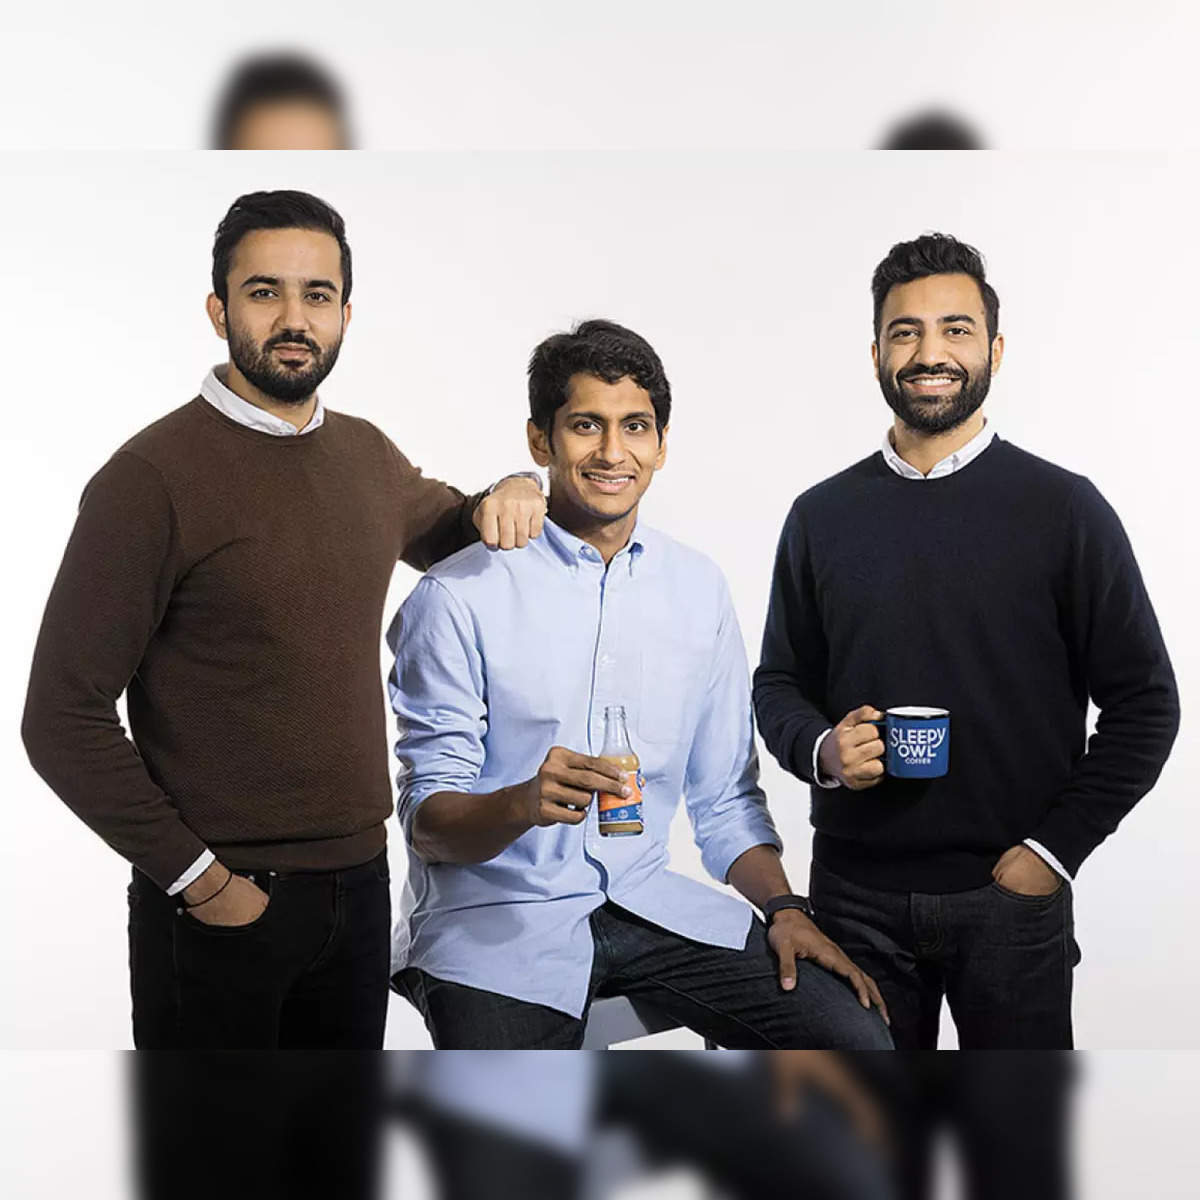 Jimmy's collaborates with Sleepy Owl Coffee to launch an Espresso Martini  Cocktail mixer - Hotelier India